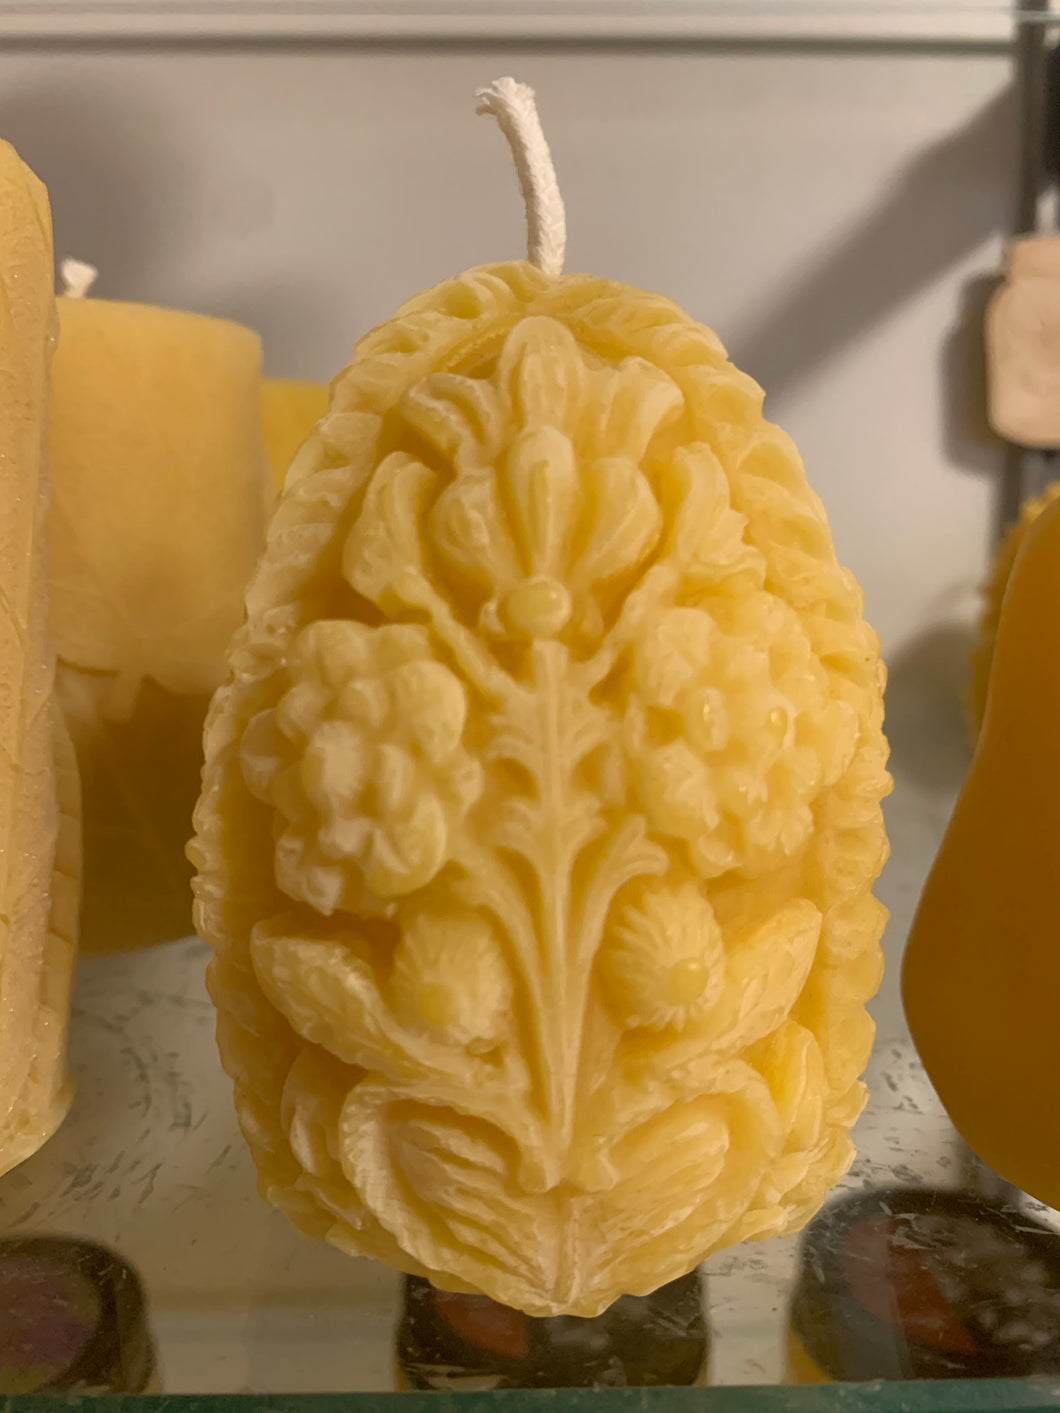 Beeswax Egg Candle